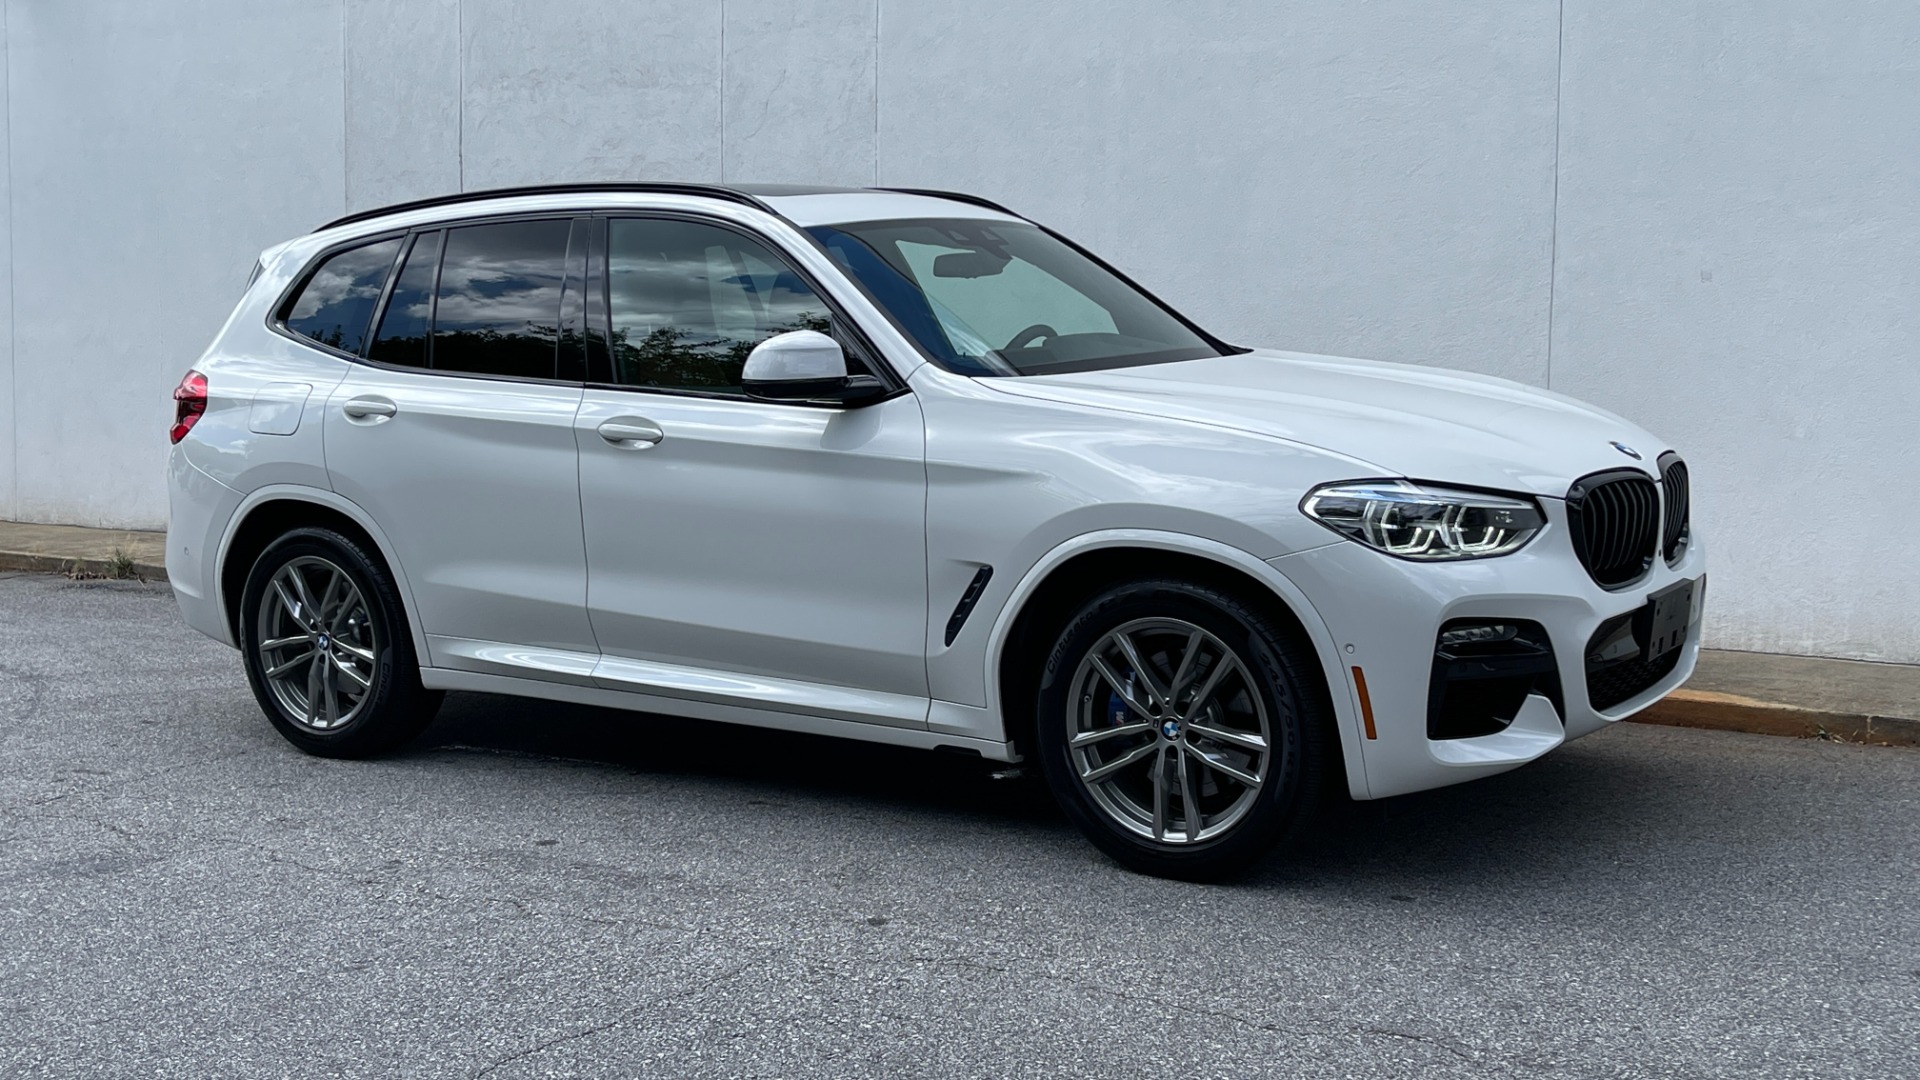 Used 2021 BMW X3 M40i / EXECUTIVE PACKAGE / SHADOWLINE TRIM / HEADS UP DISPLAY / AMBIENT LIG for sale Sold at Formula Imports in Charlotte NC 28227 2